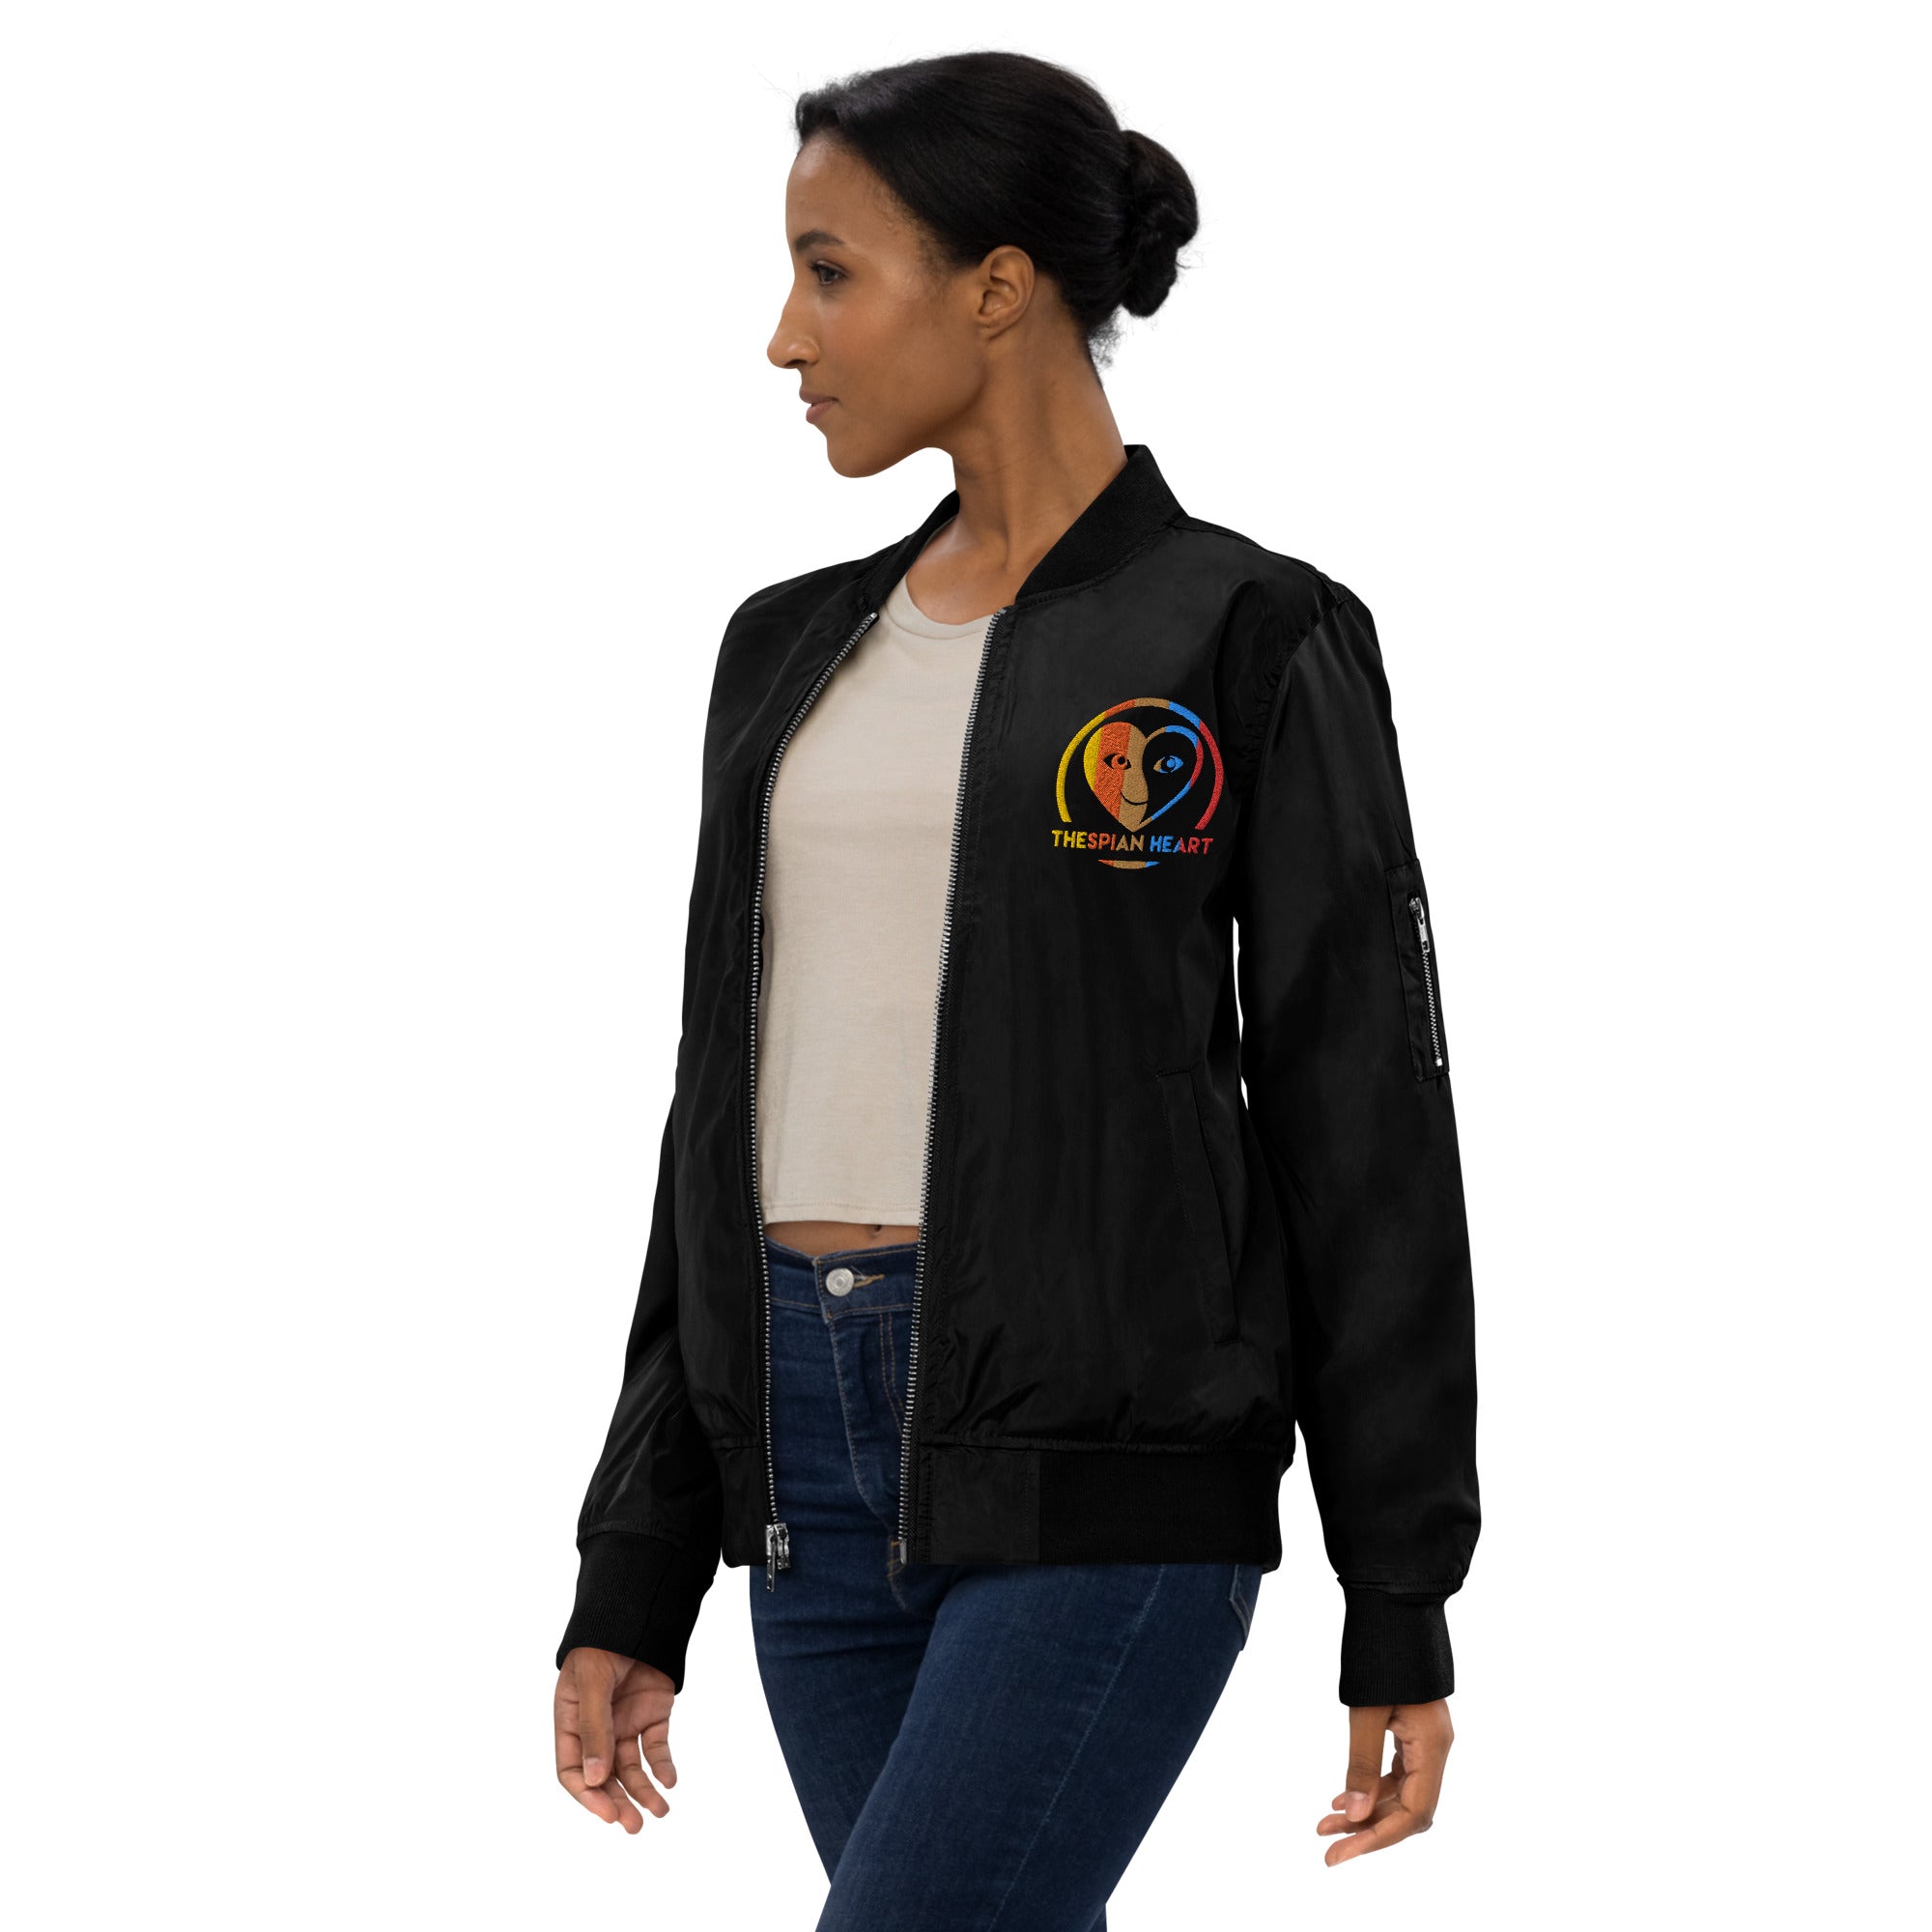 #Actorlife Embroidered Premium Recycled Bomber Jacket